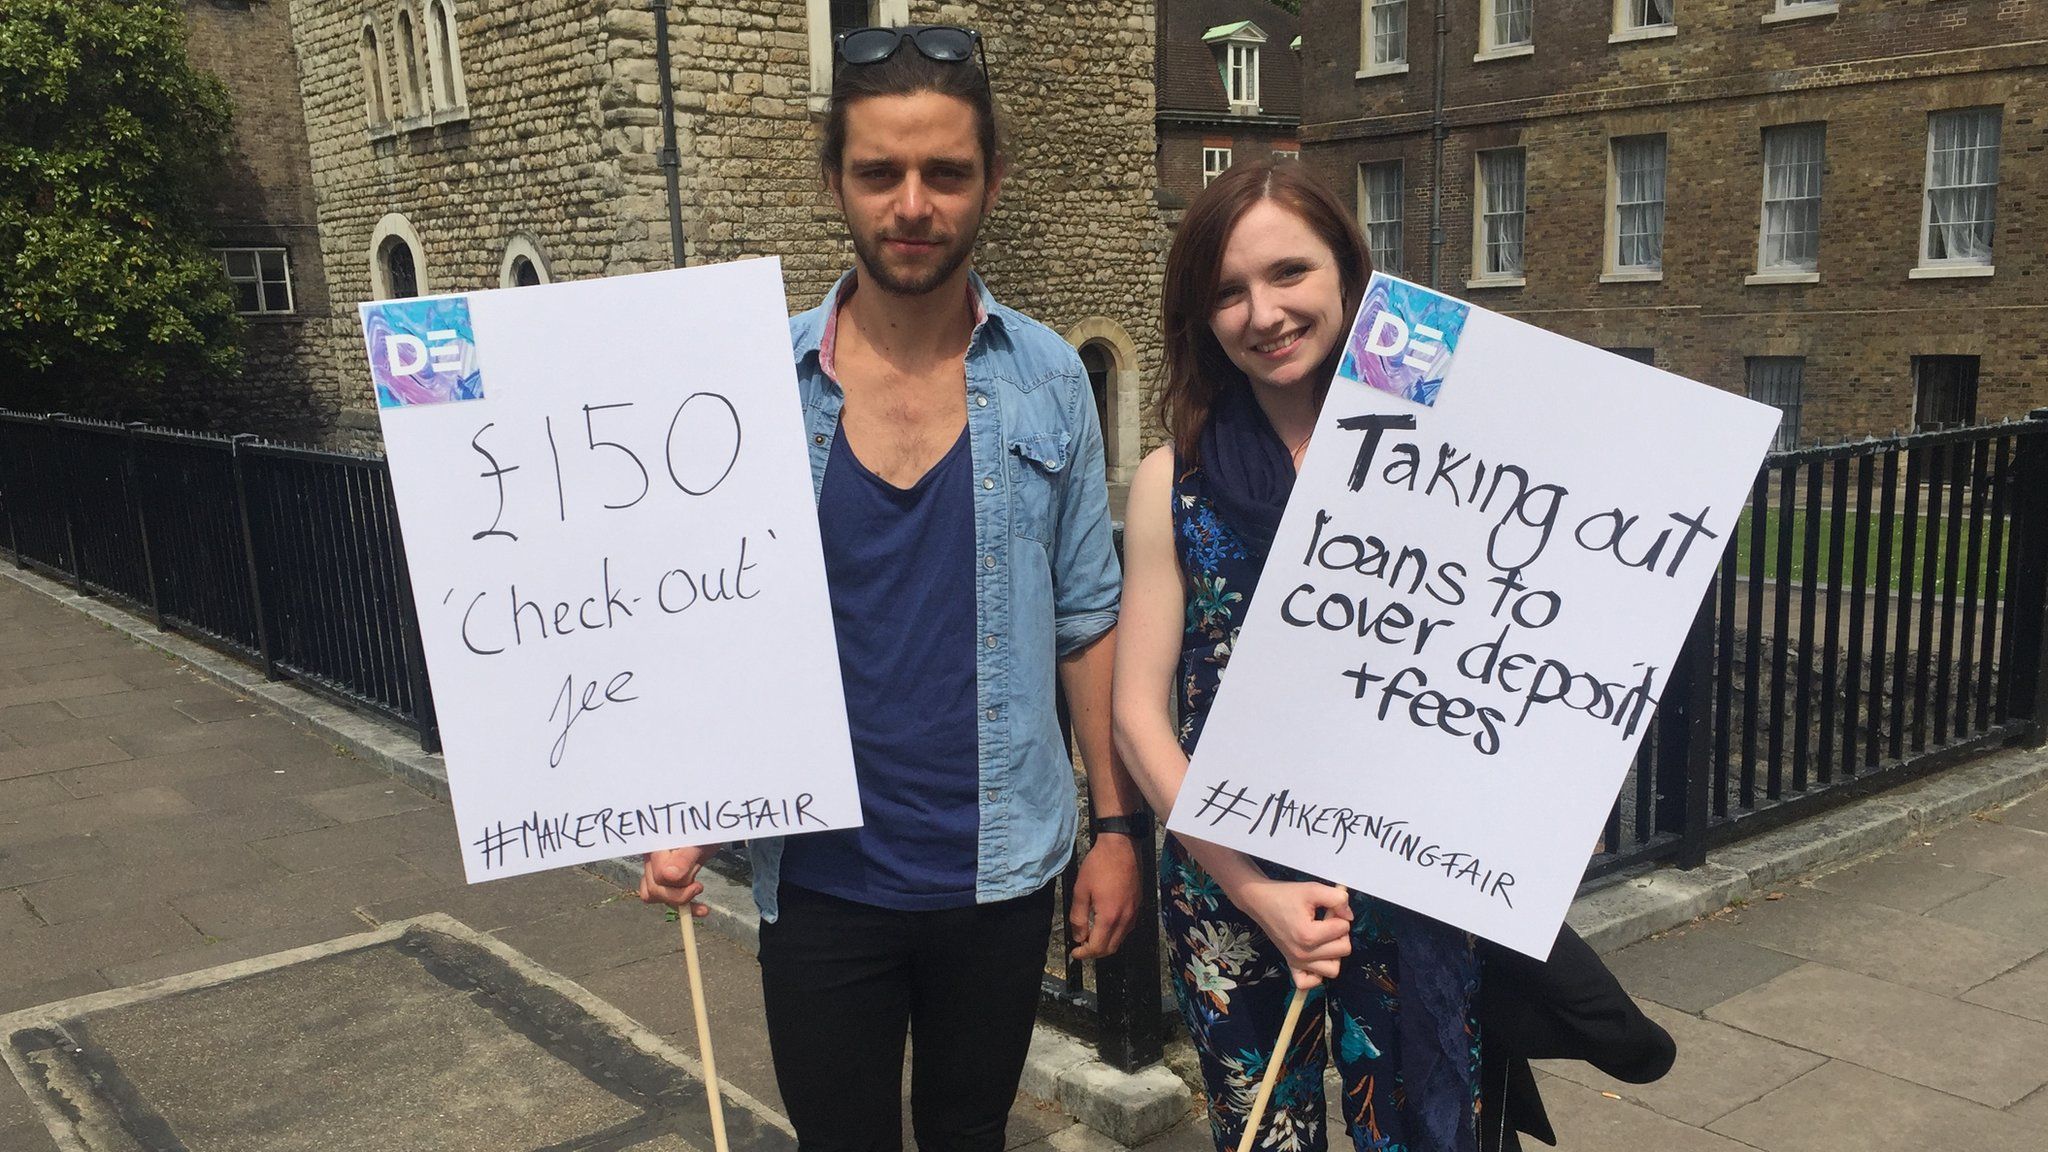 Vicki and Ben aren't happy with the fees they had to pay on their rental agreements.